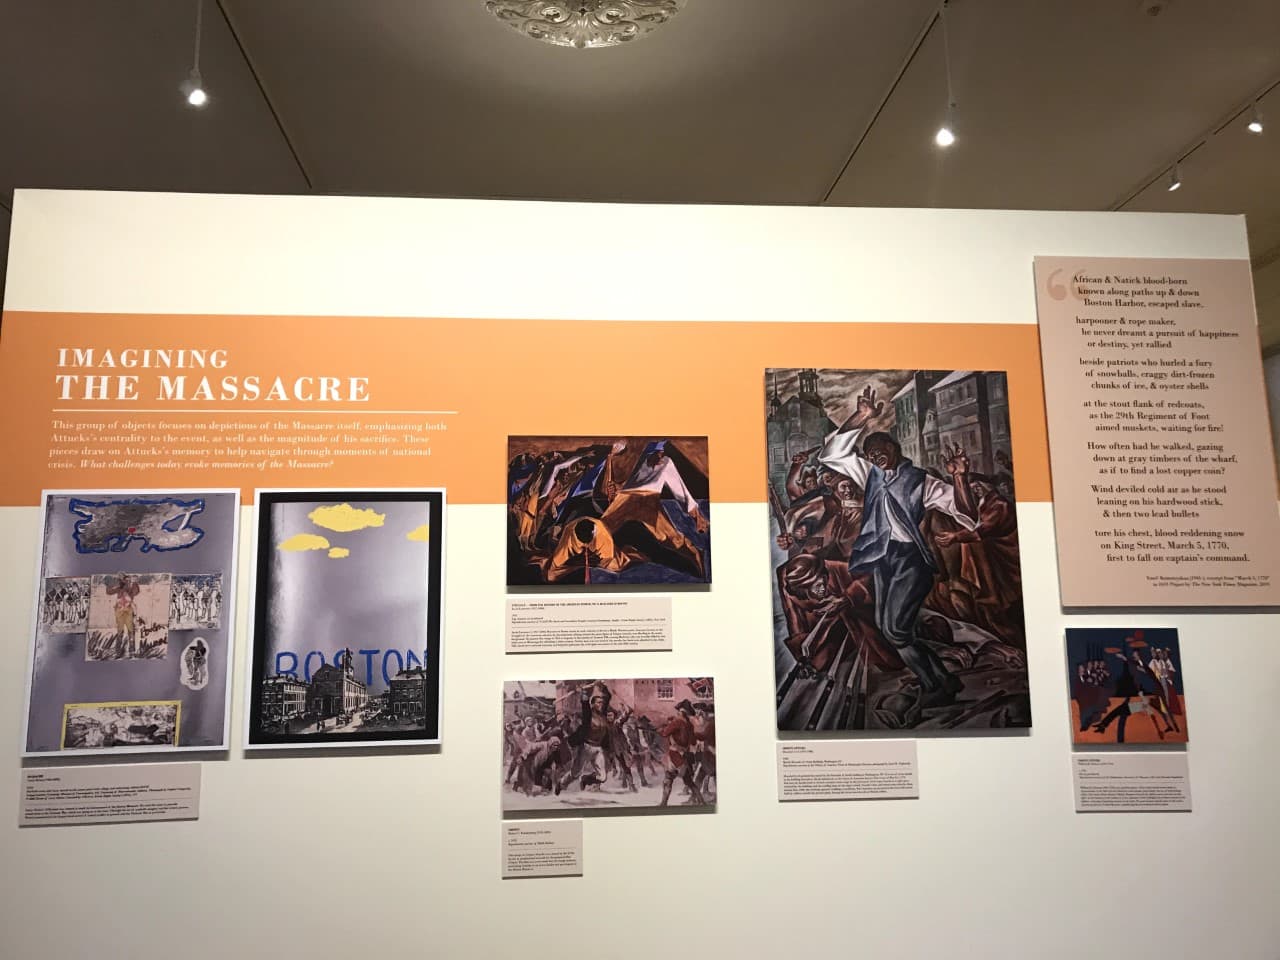 The exhibit looks at how artists have portrayed Attucks and the Boston Massacre throughout time. (Courtesy Revolutionary Spaces)